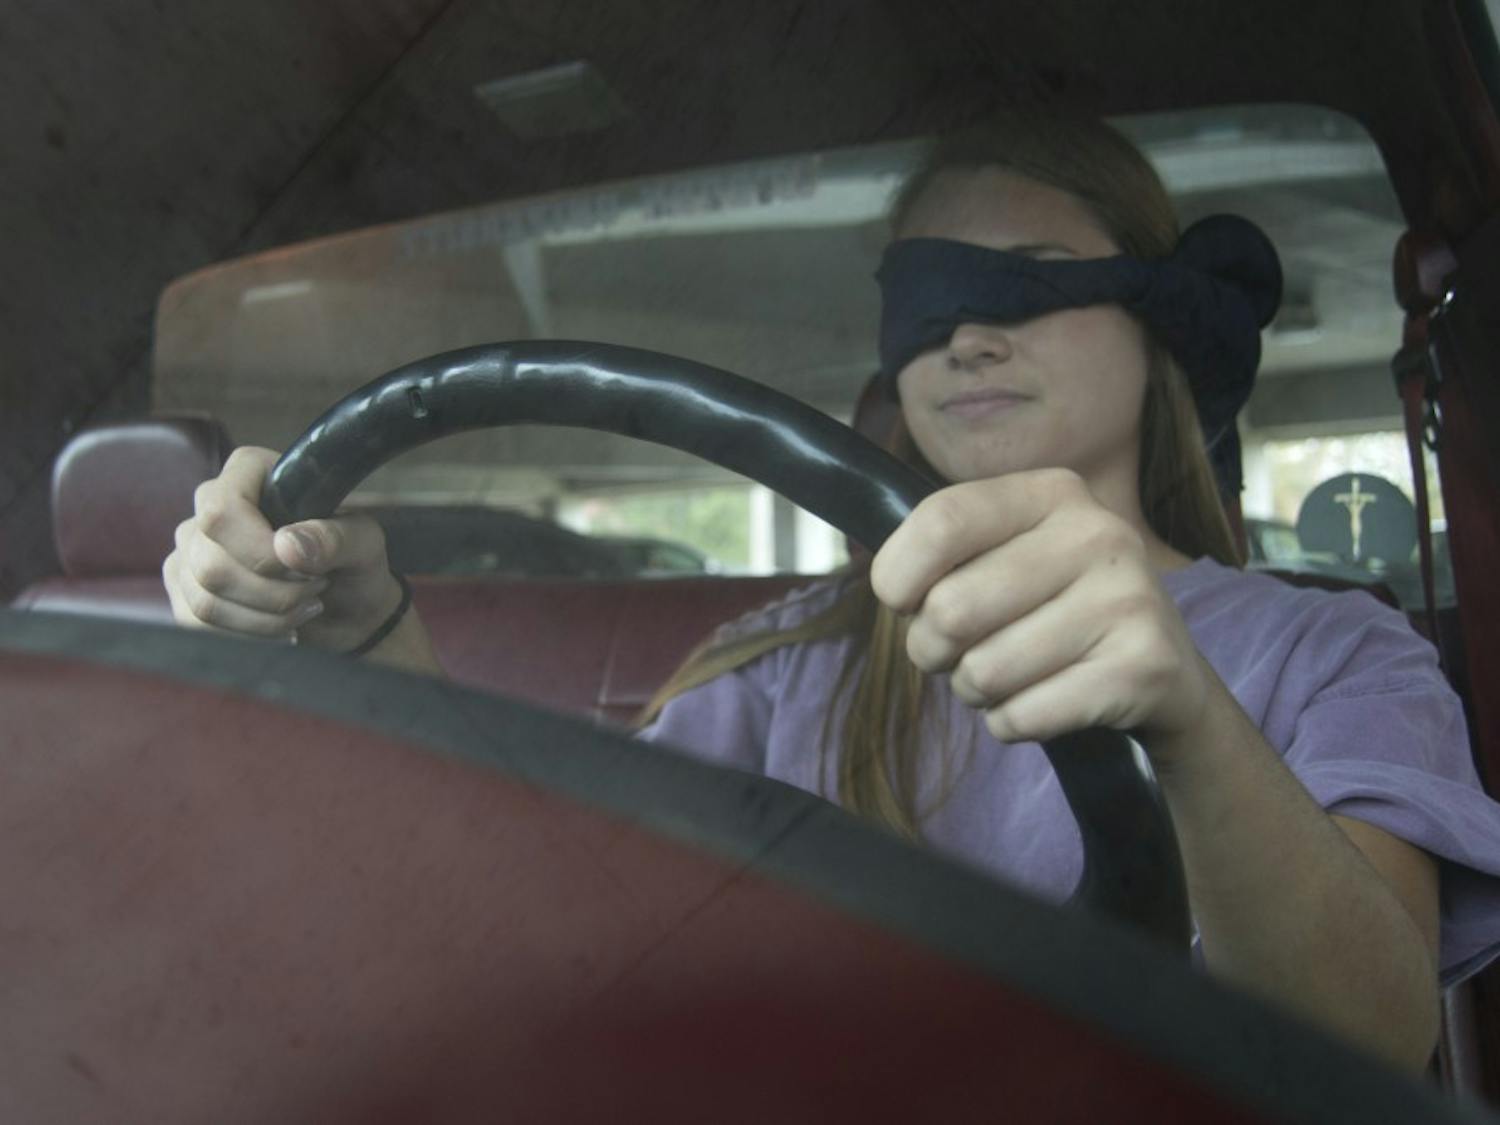 A driver poses blindfolded in a car.&nbsp;